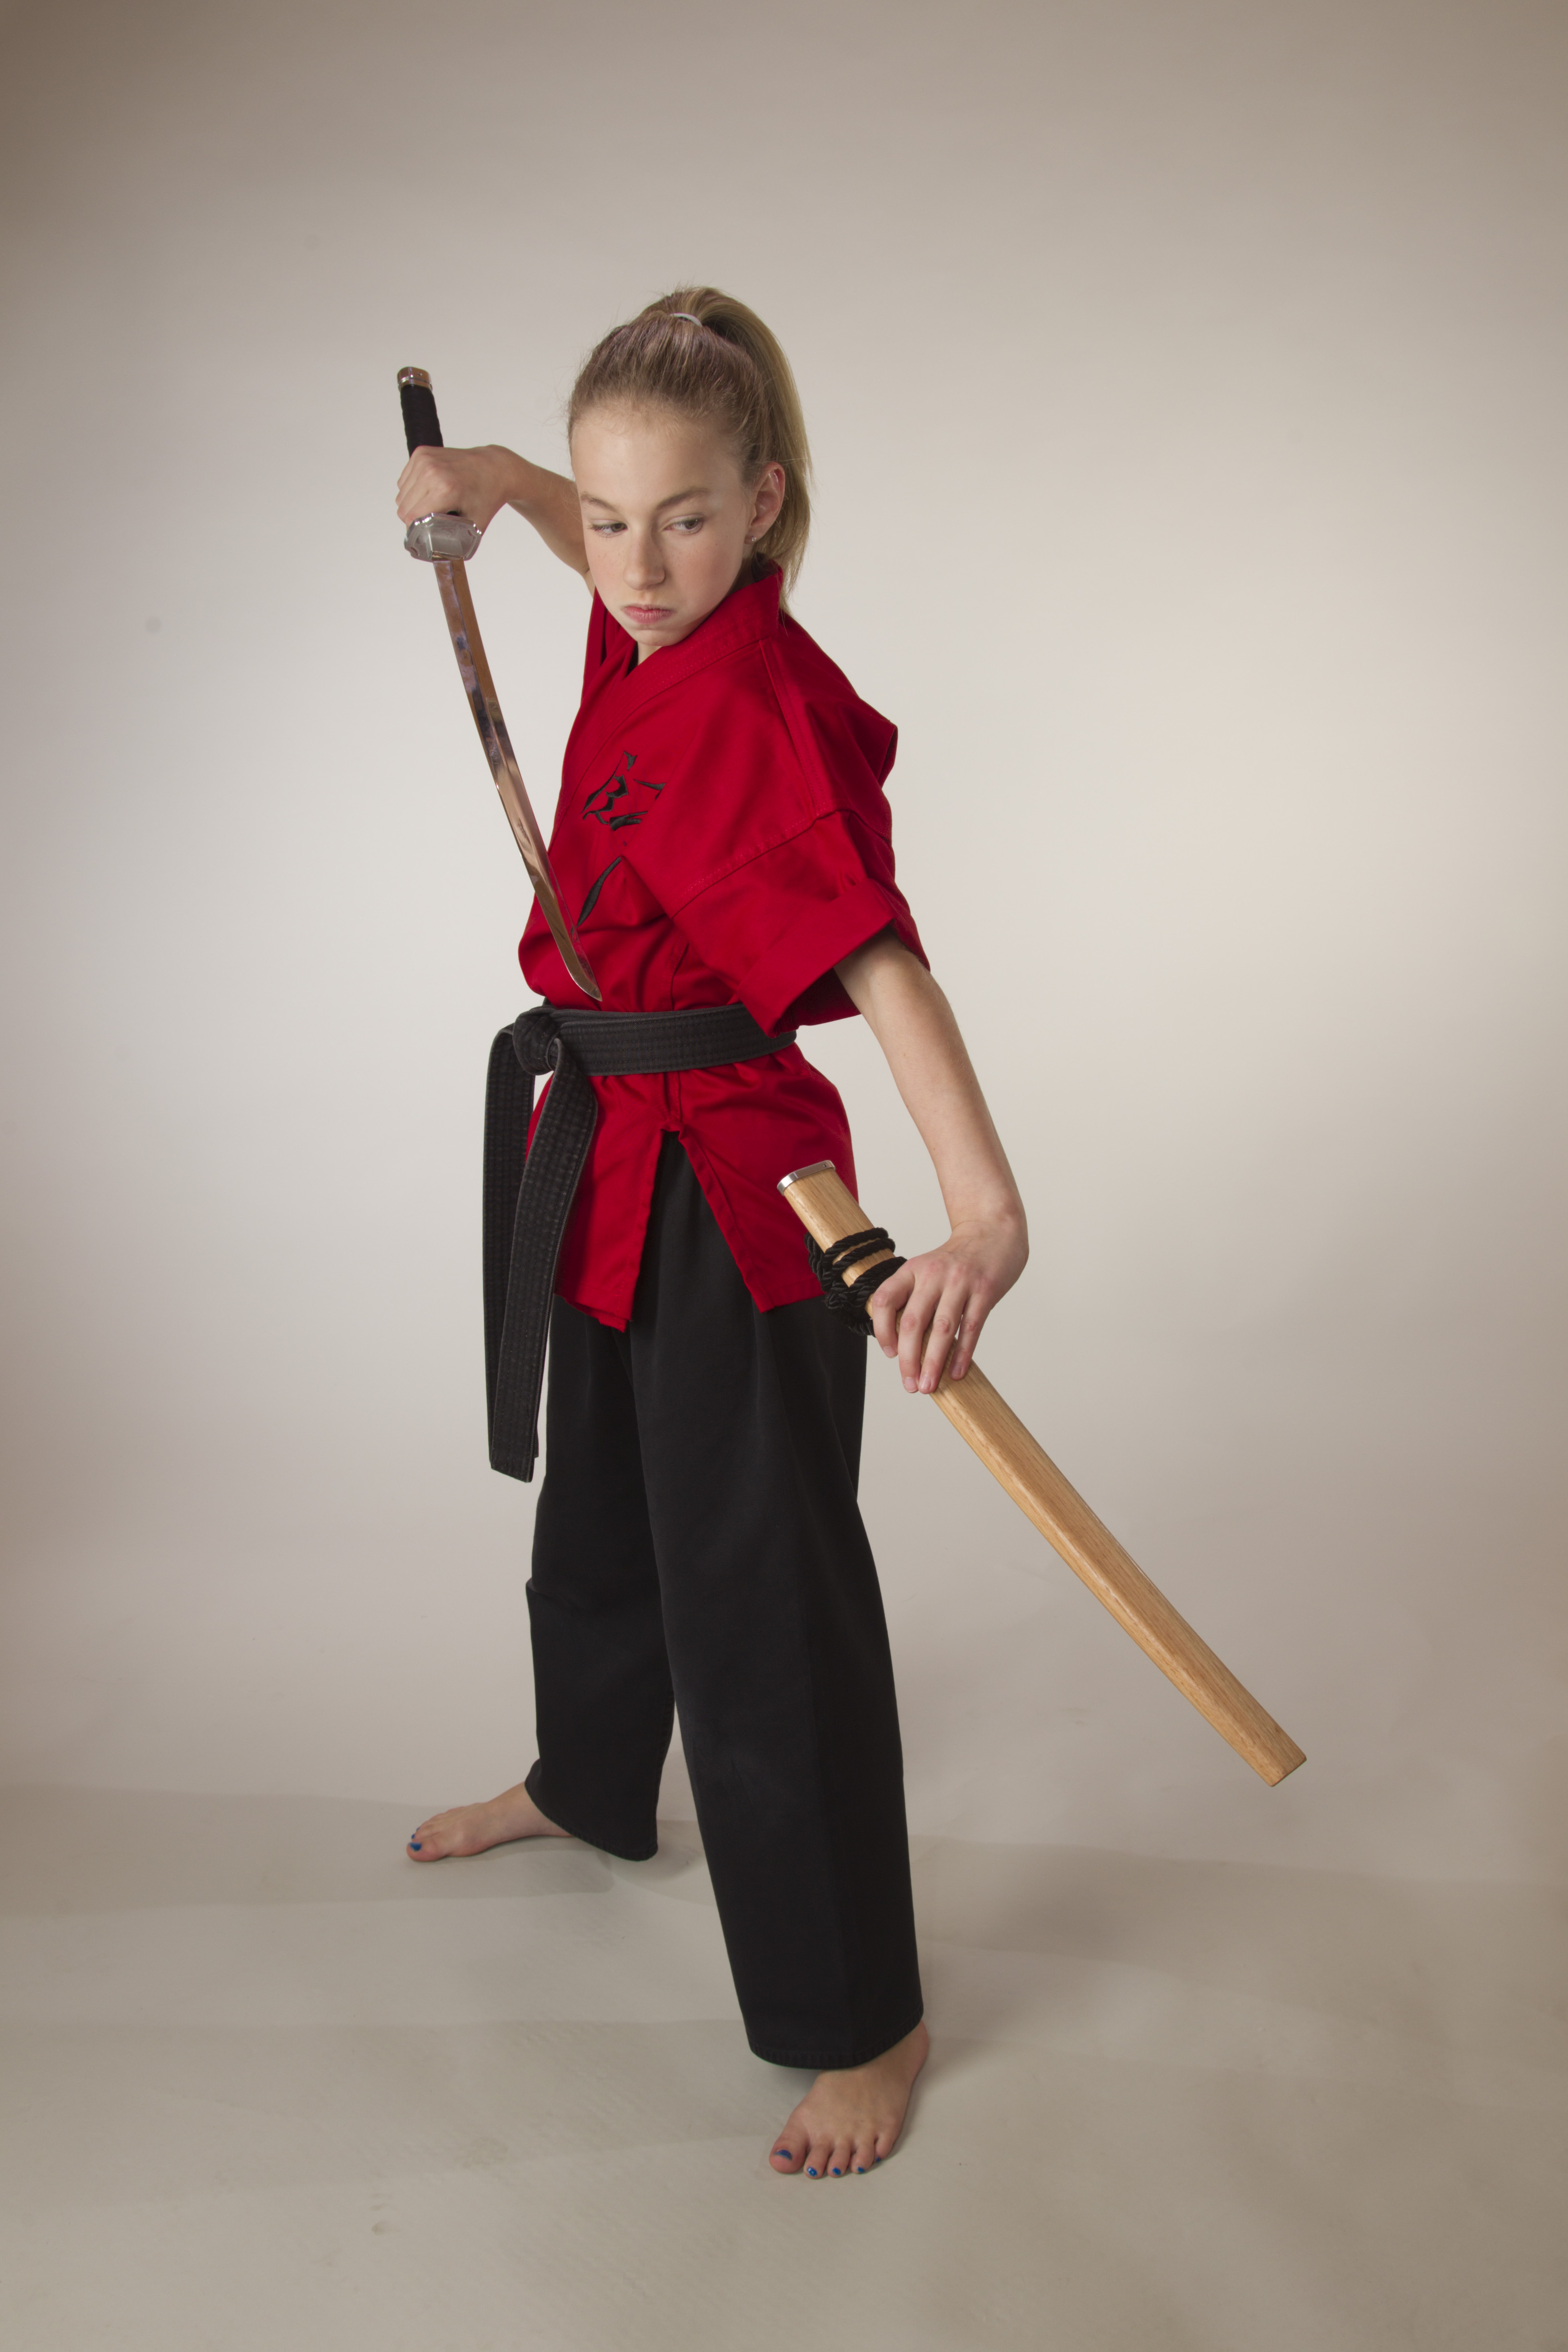 Sammy Smith, 13 time World Champion Martial Artist, proficient in the use of the sword, as well as nunchucks, kamas and Bo Staff